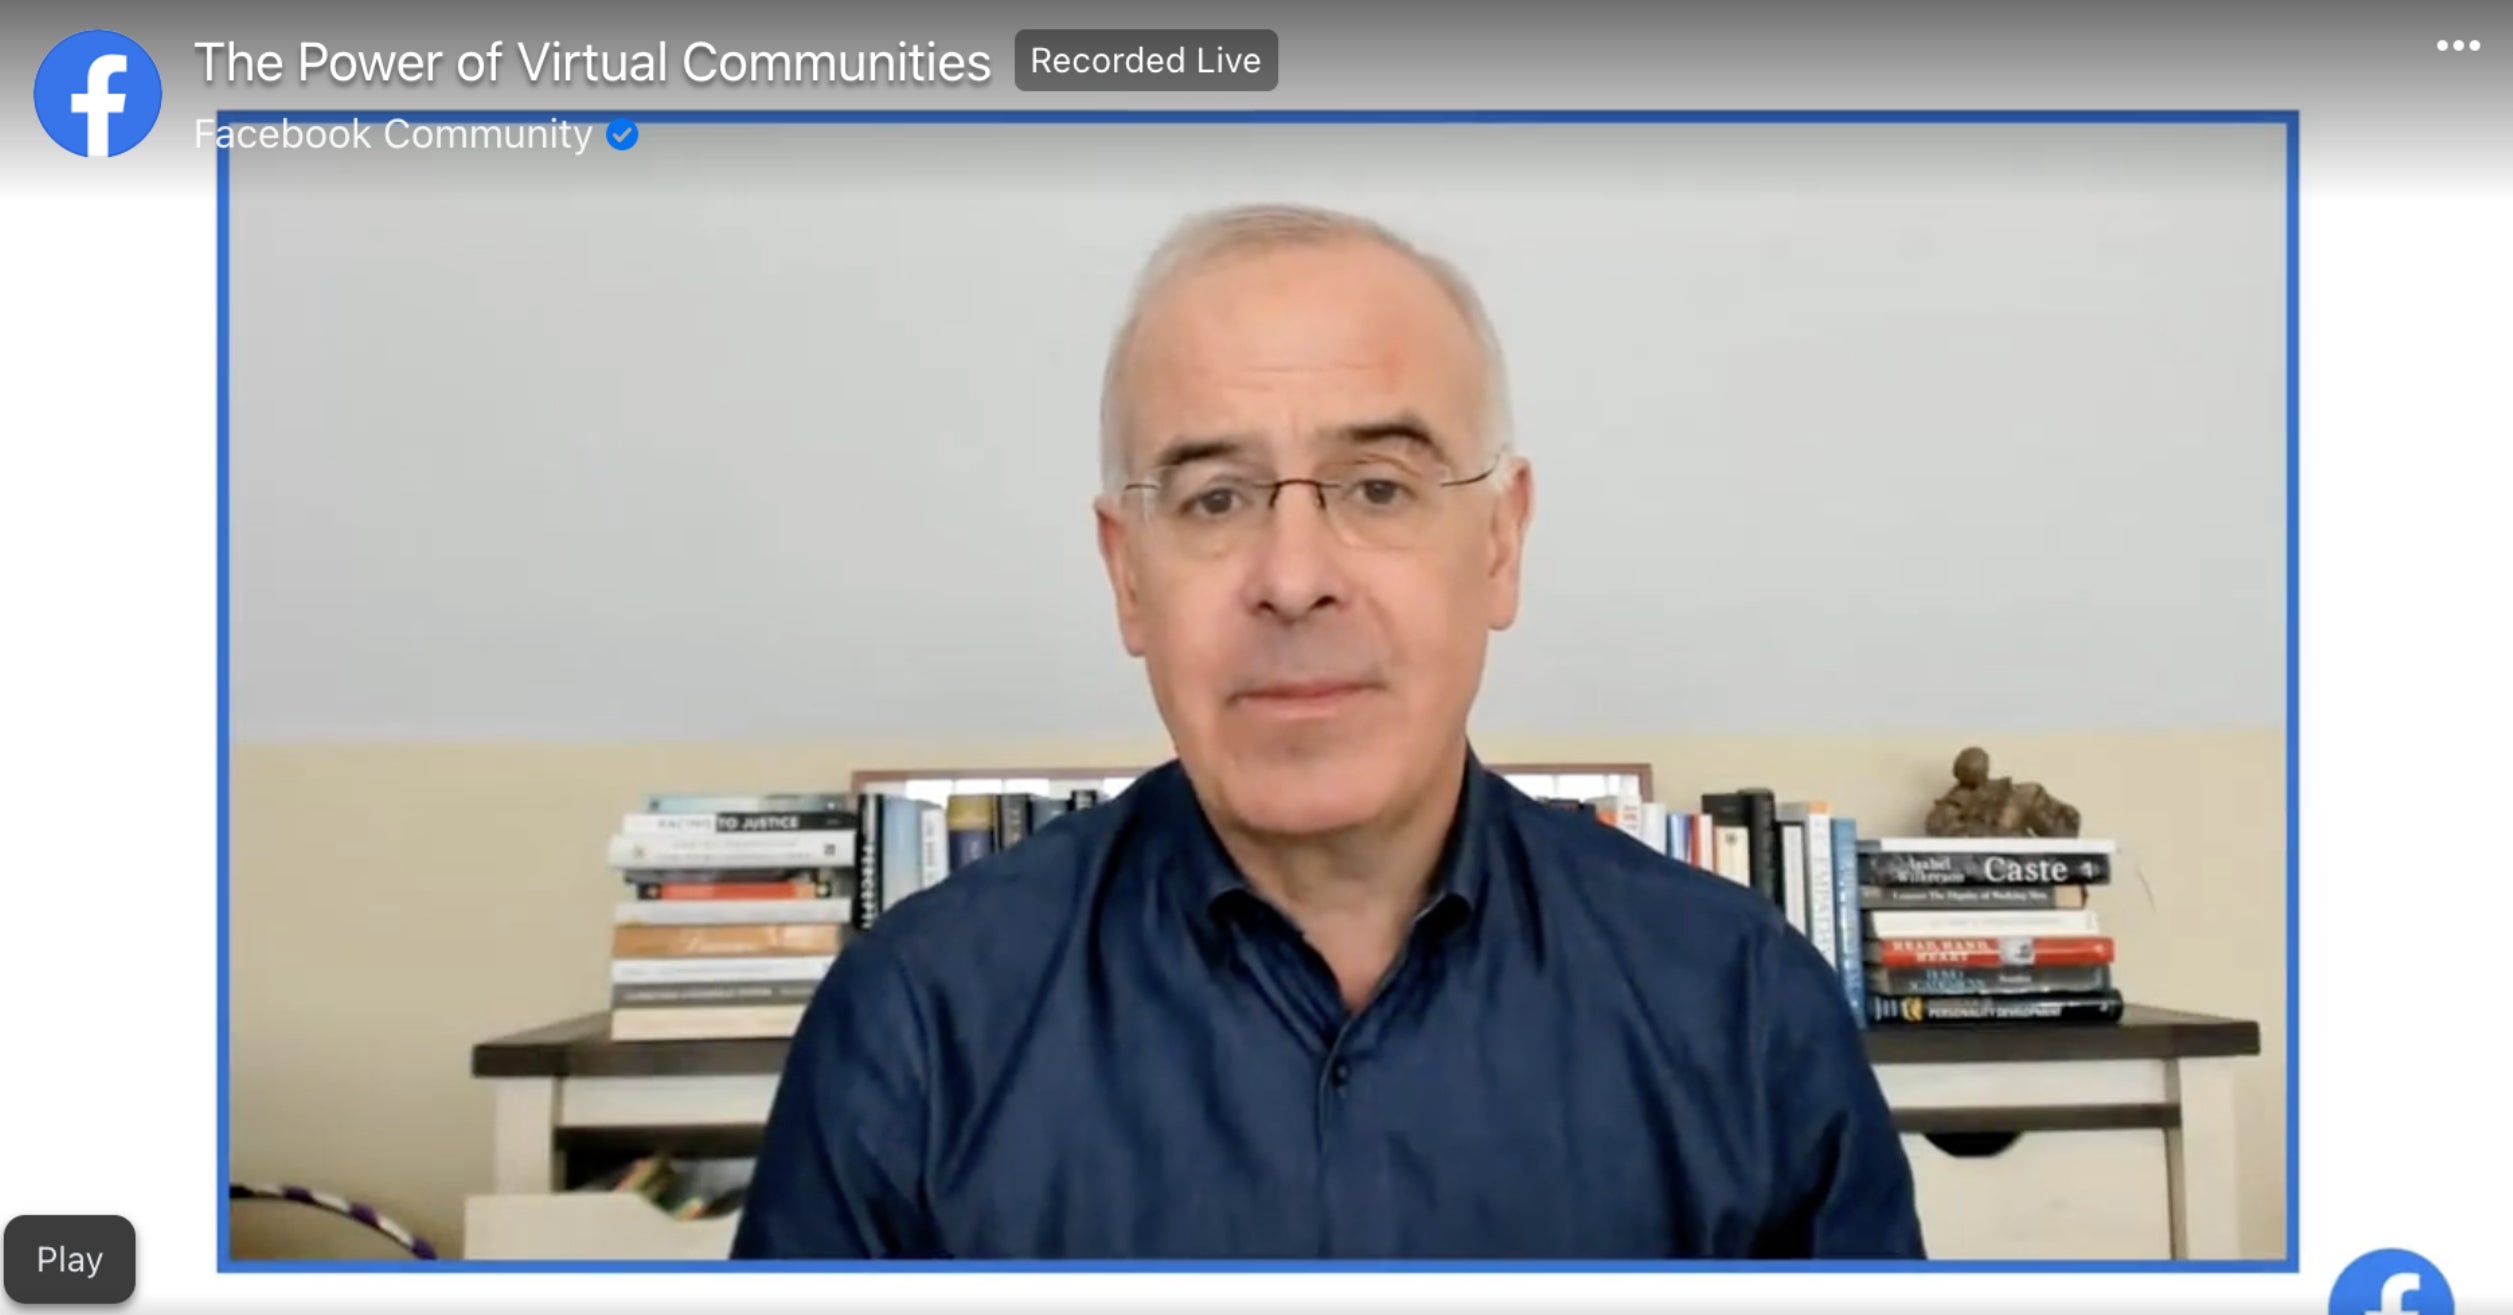 New York Times Columnist David Brooks Wrote A Blog Post For Facebook’s Corporate Website